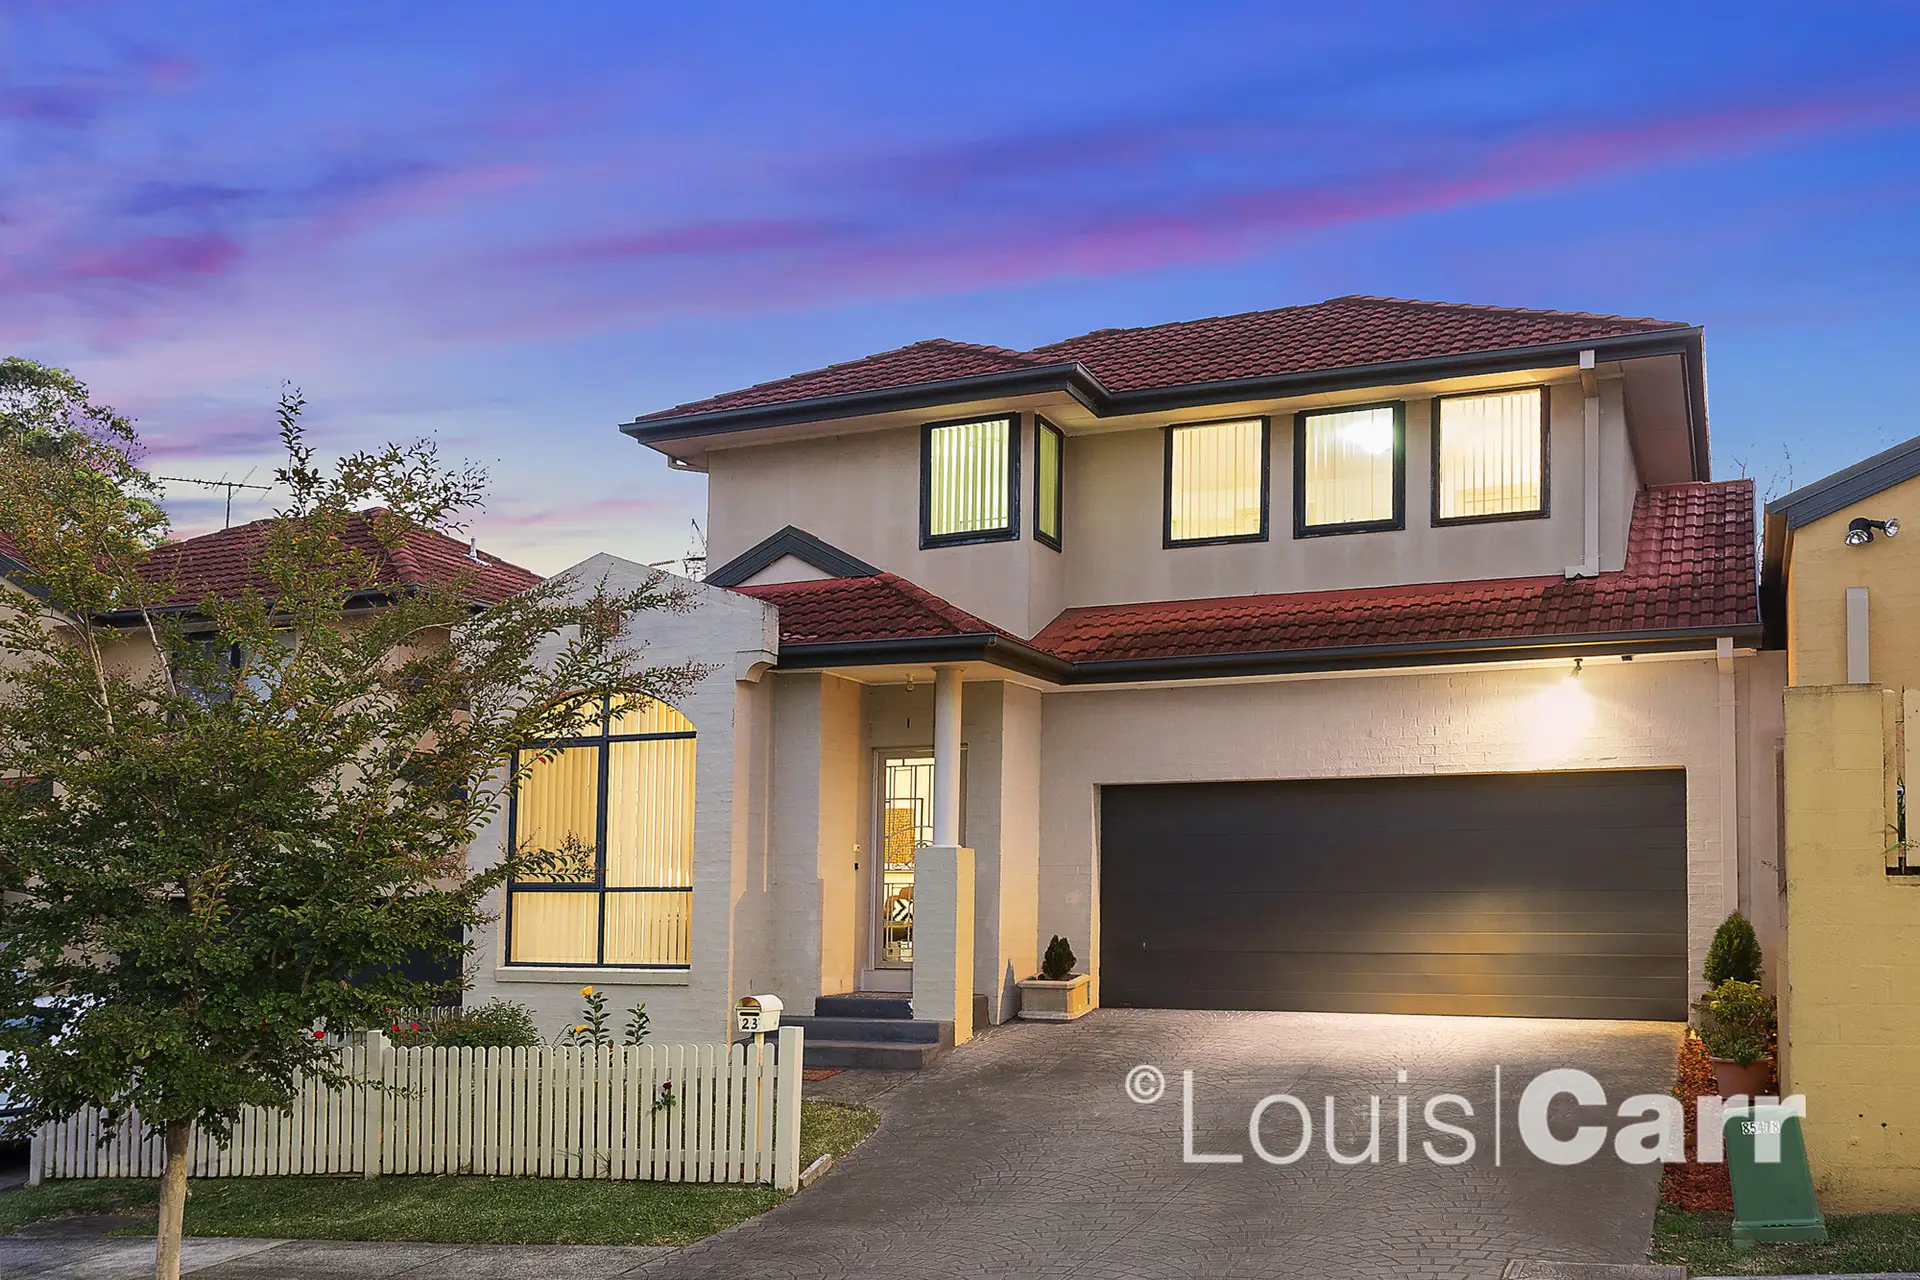 Photo #1: 23 Peartree Circuit, West Pennant Hills - Sold by Louis Carr Real Estate